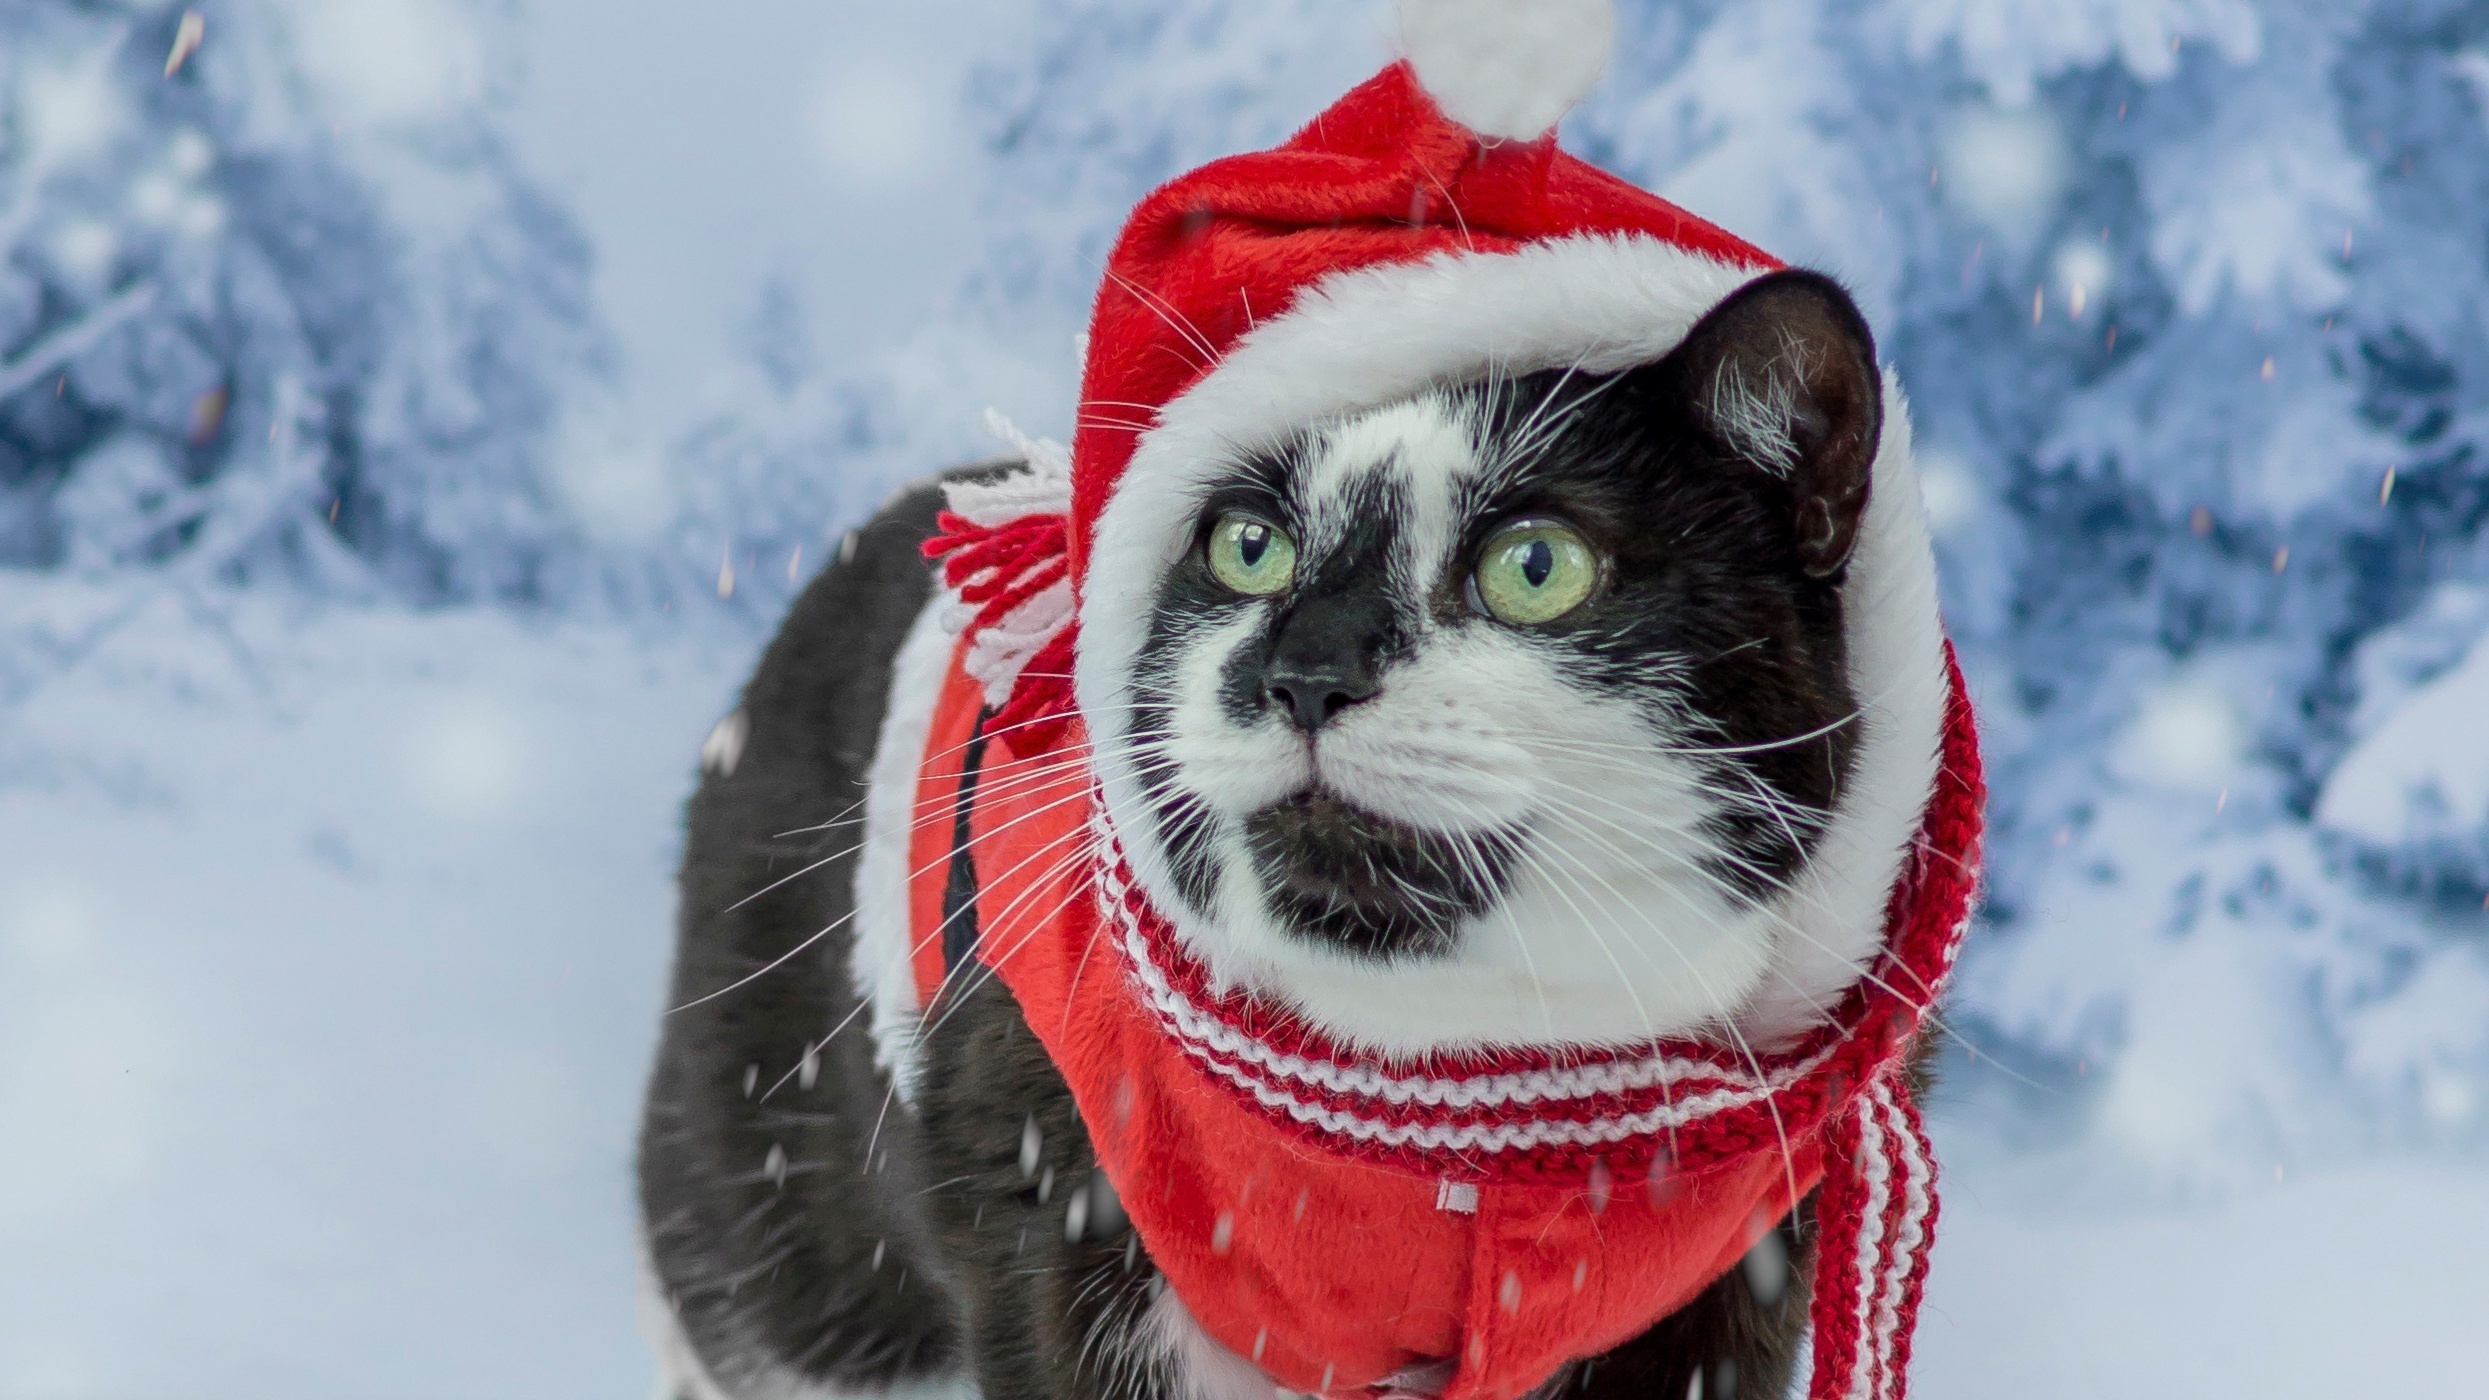 Image: Cat, black and white, hat, red, winter, snow